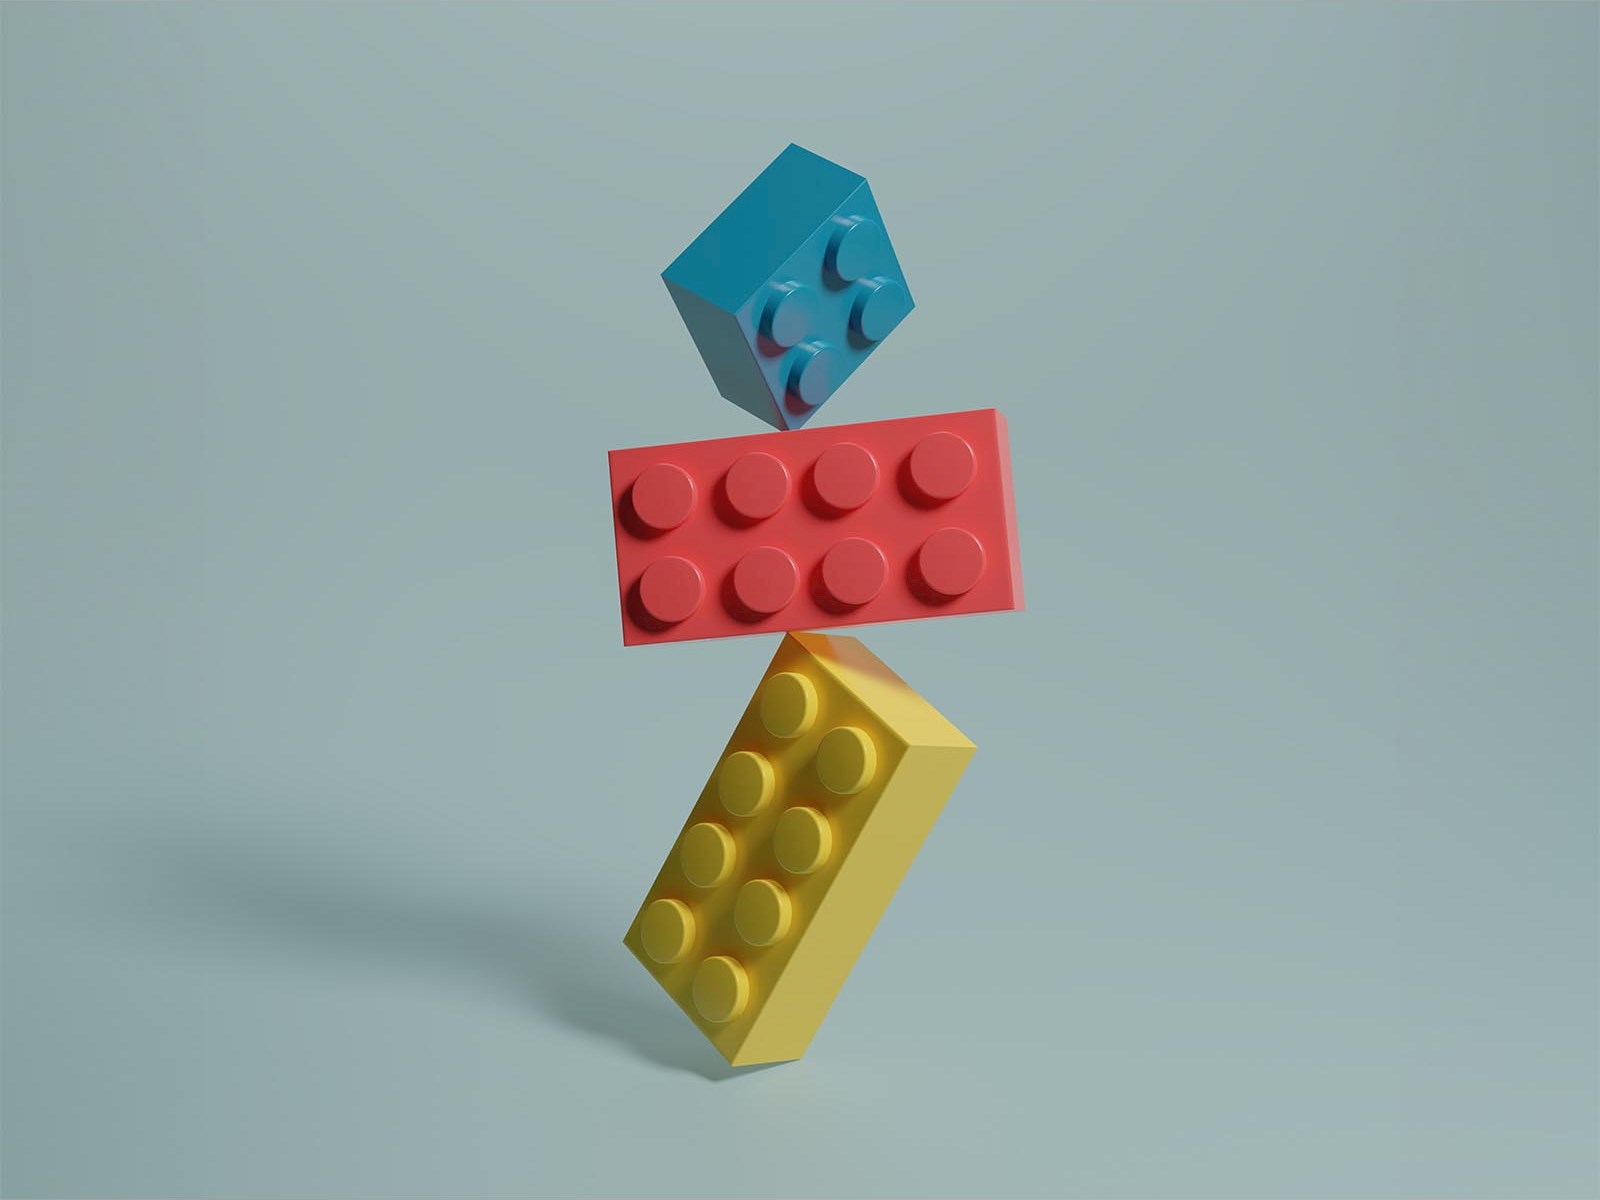 2D illustration lego bricks yellow red blue balancing on one another grey background